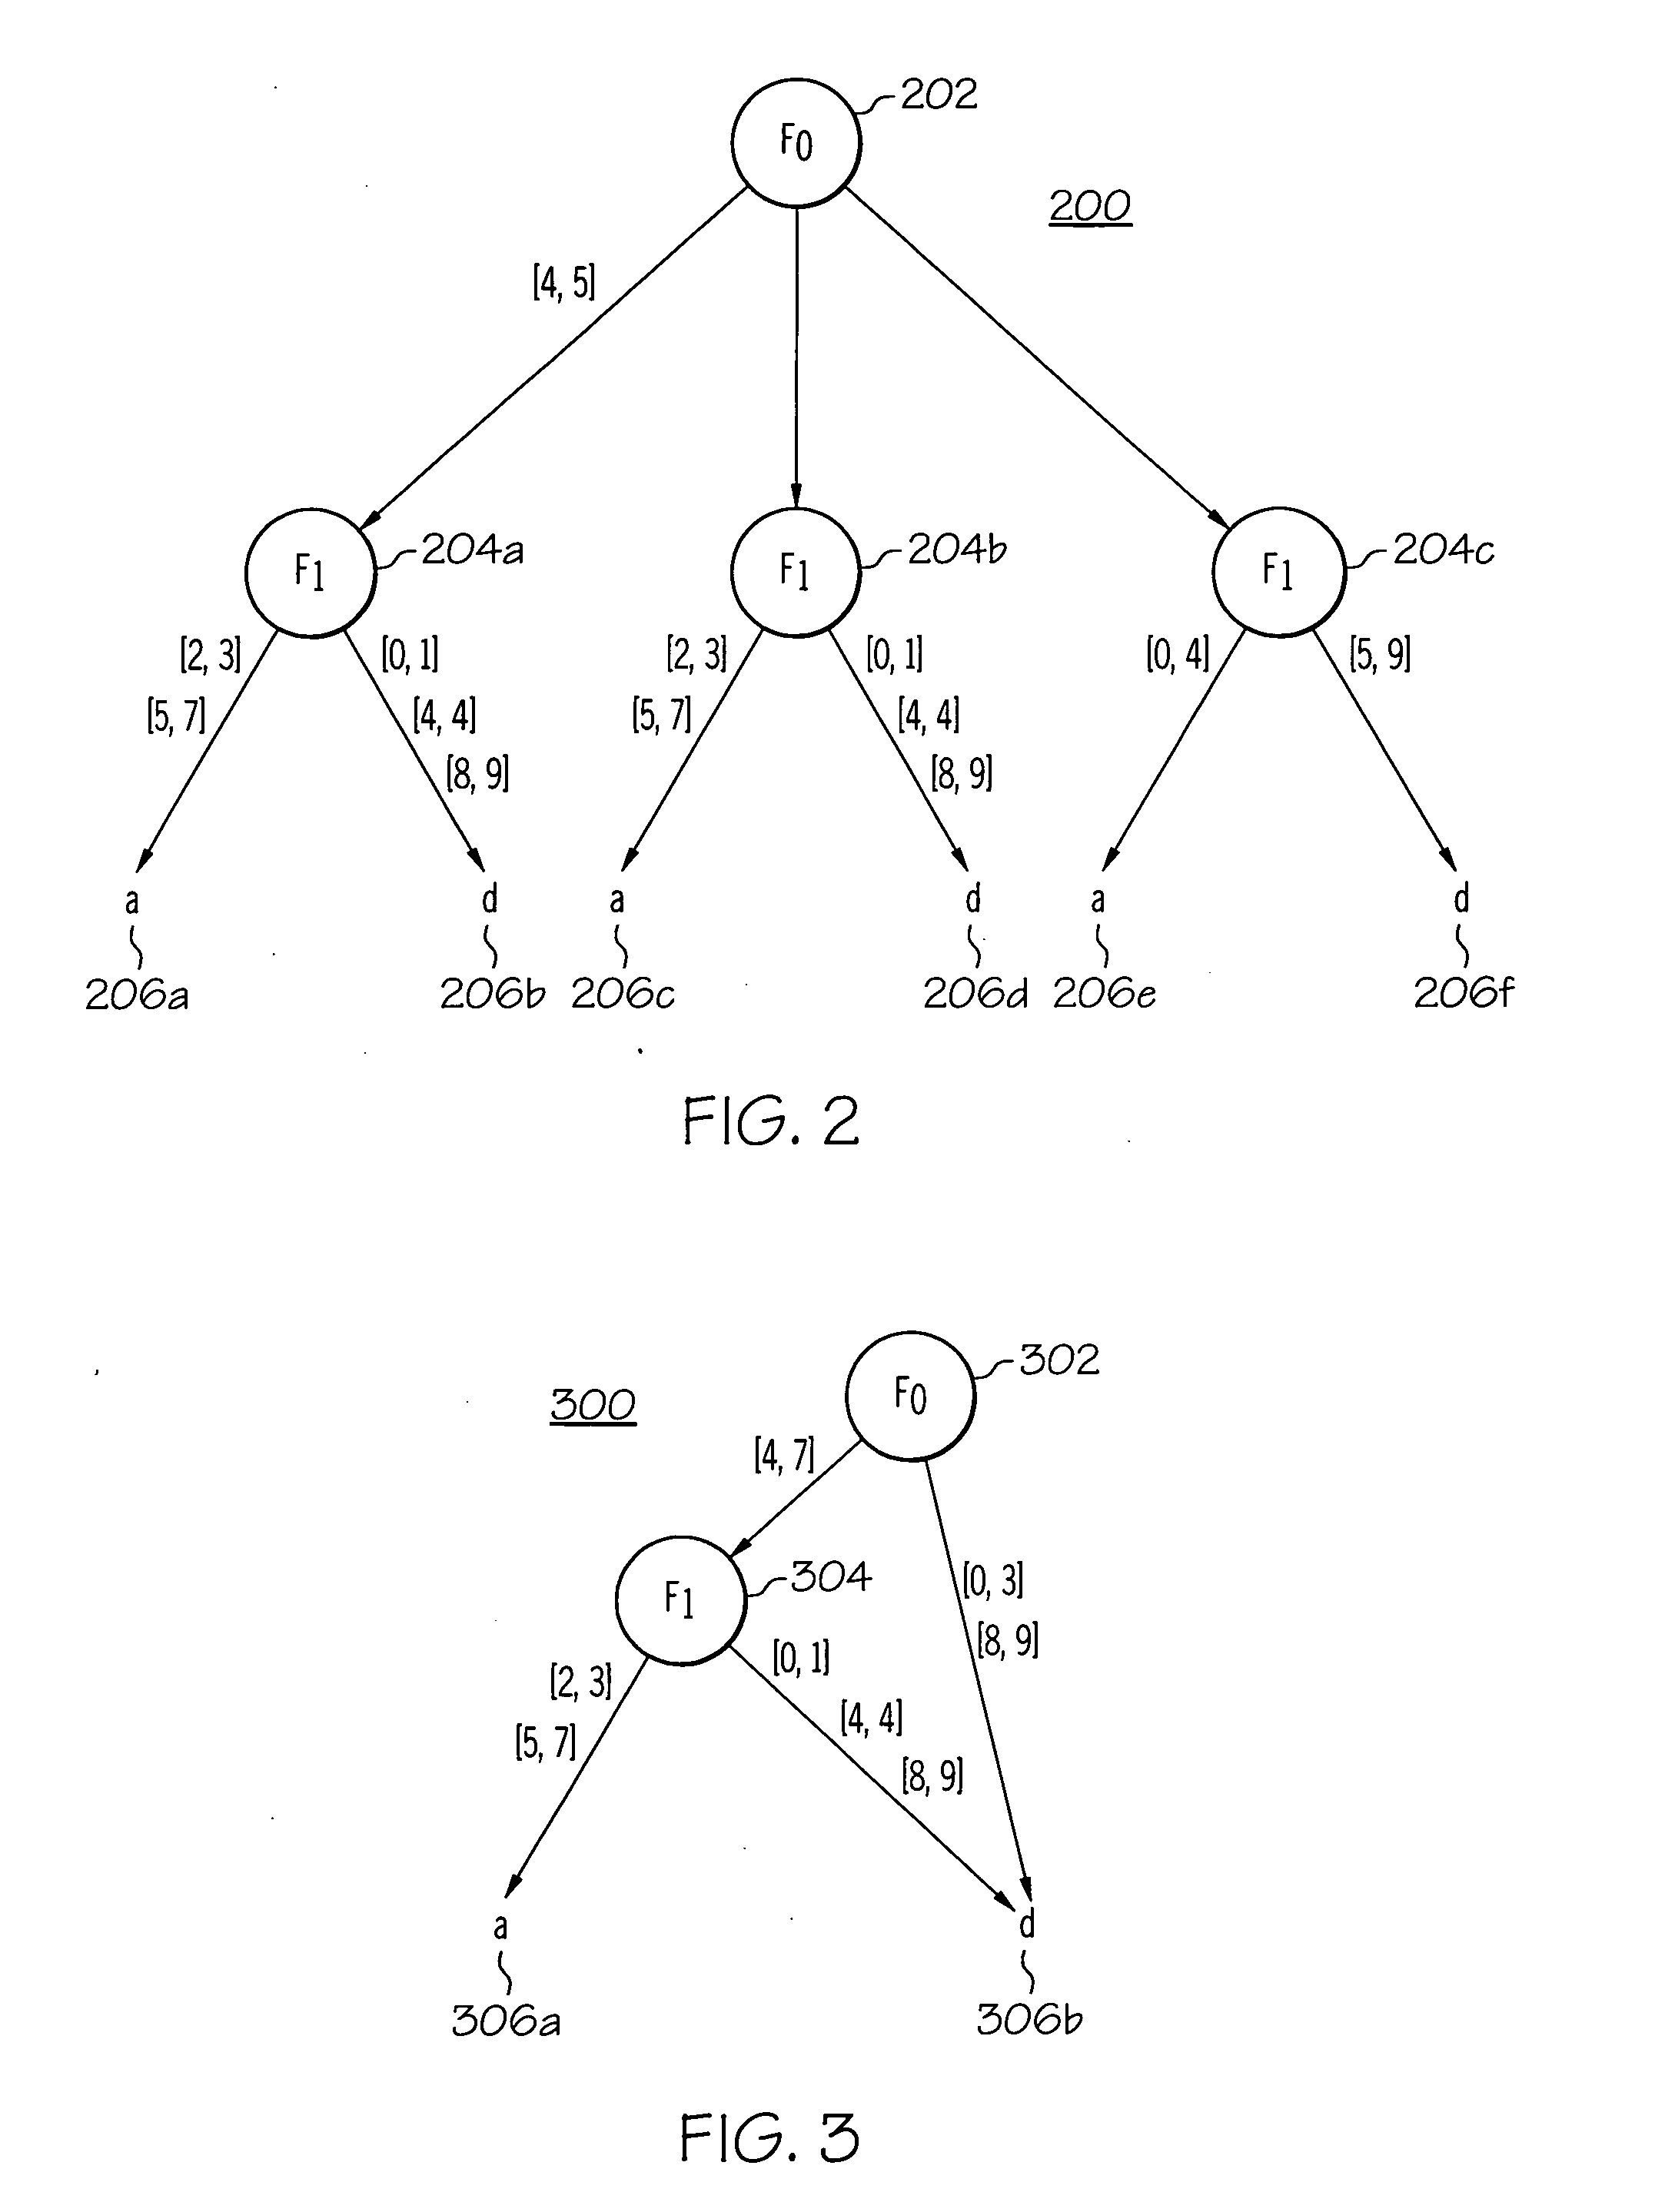 System and method of firewall design utilizing decision diagrams